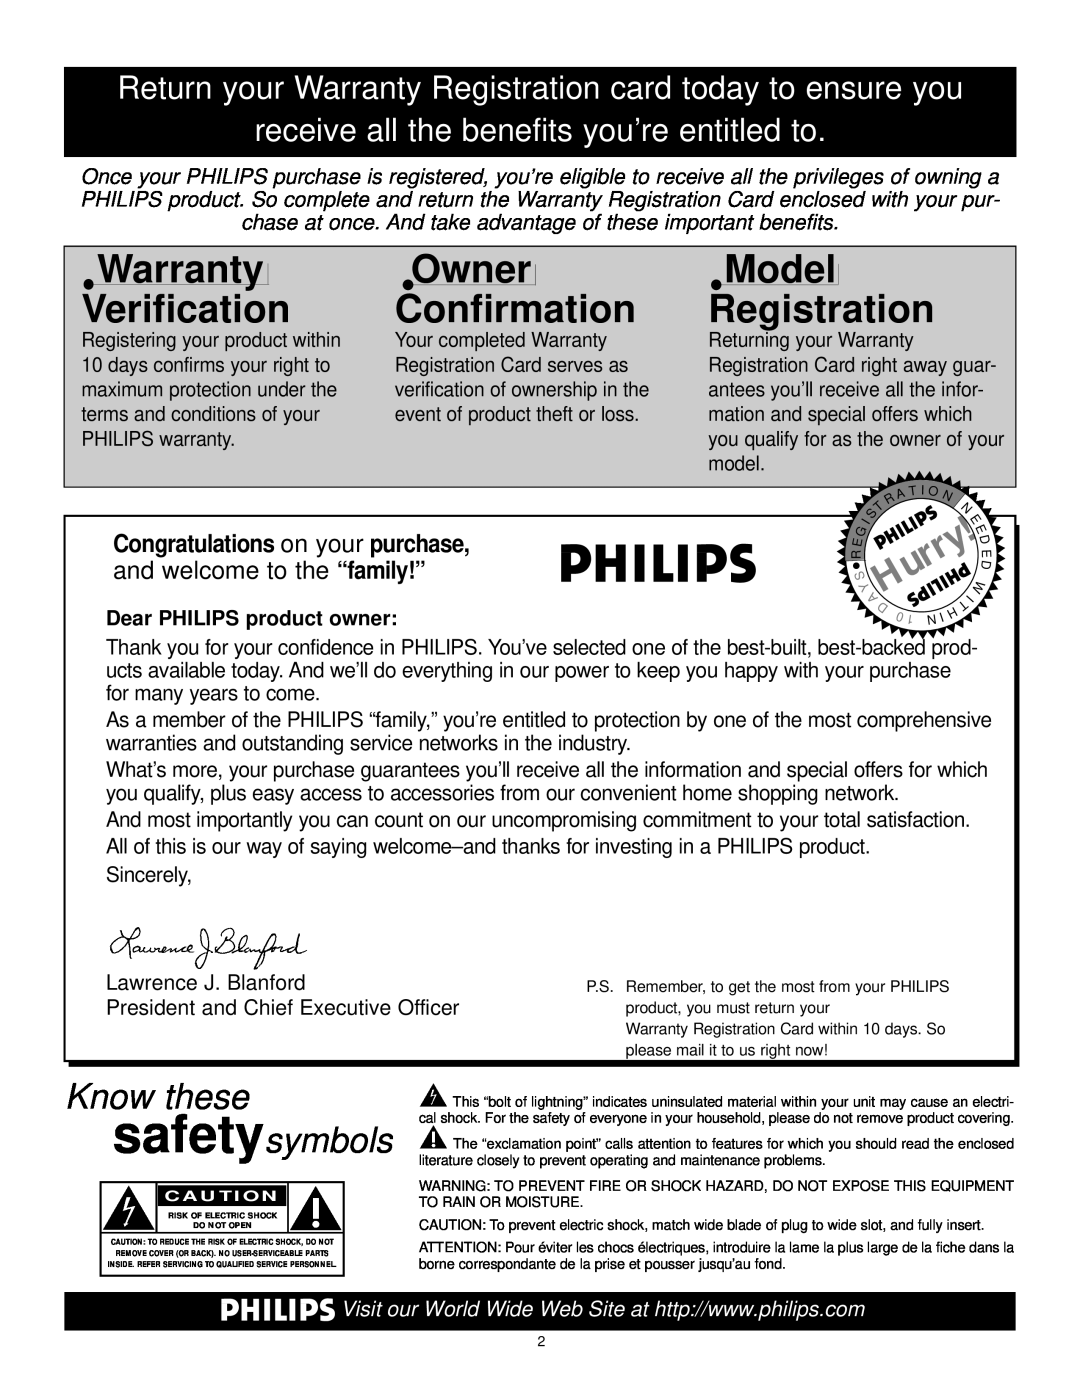 Philips 43PP9202, 50PP 9202 Warranty Verification, Owner Confirmation, Model Registration, Know these safetysymbols, Hurry 